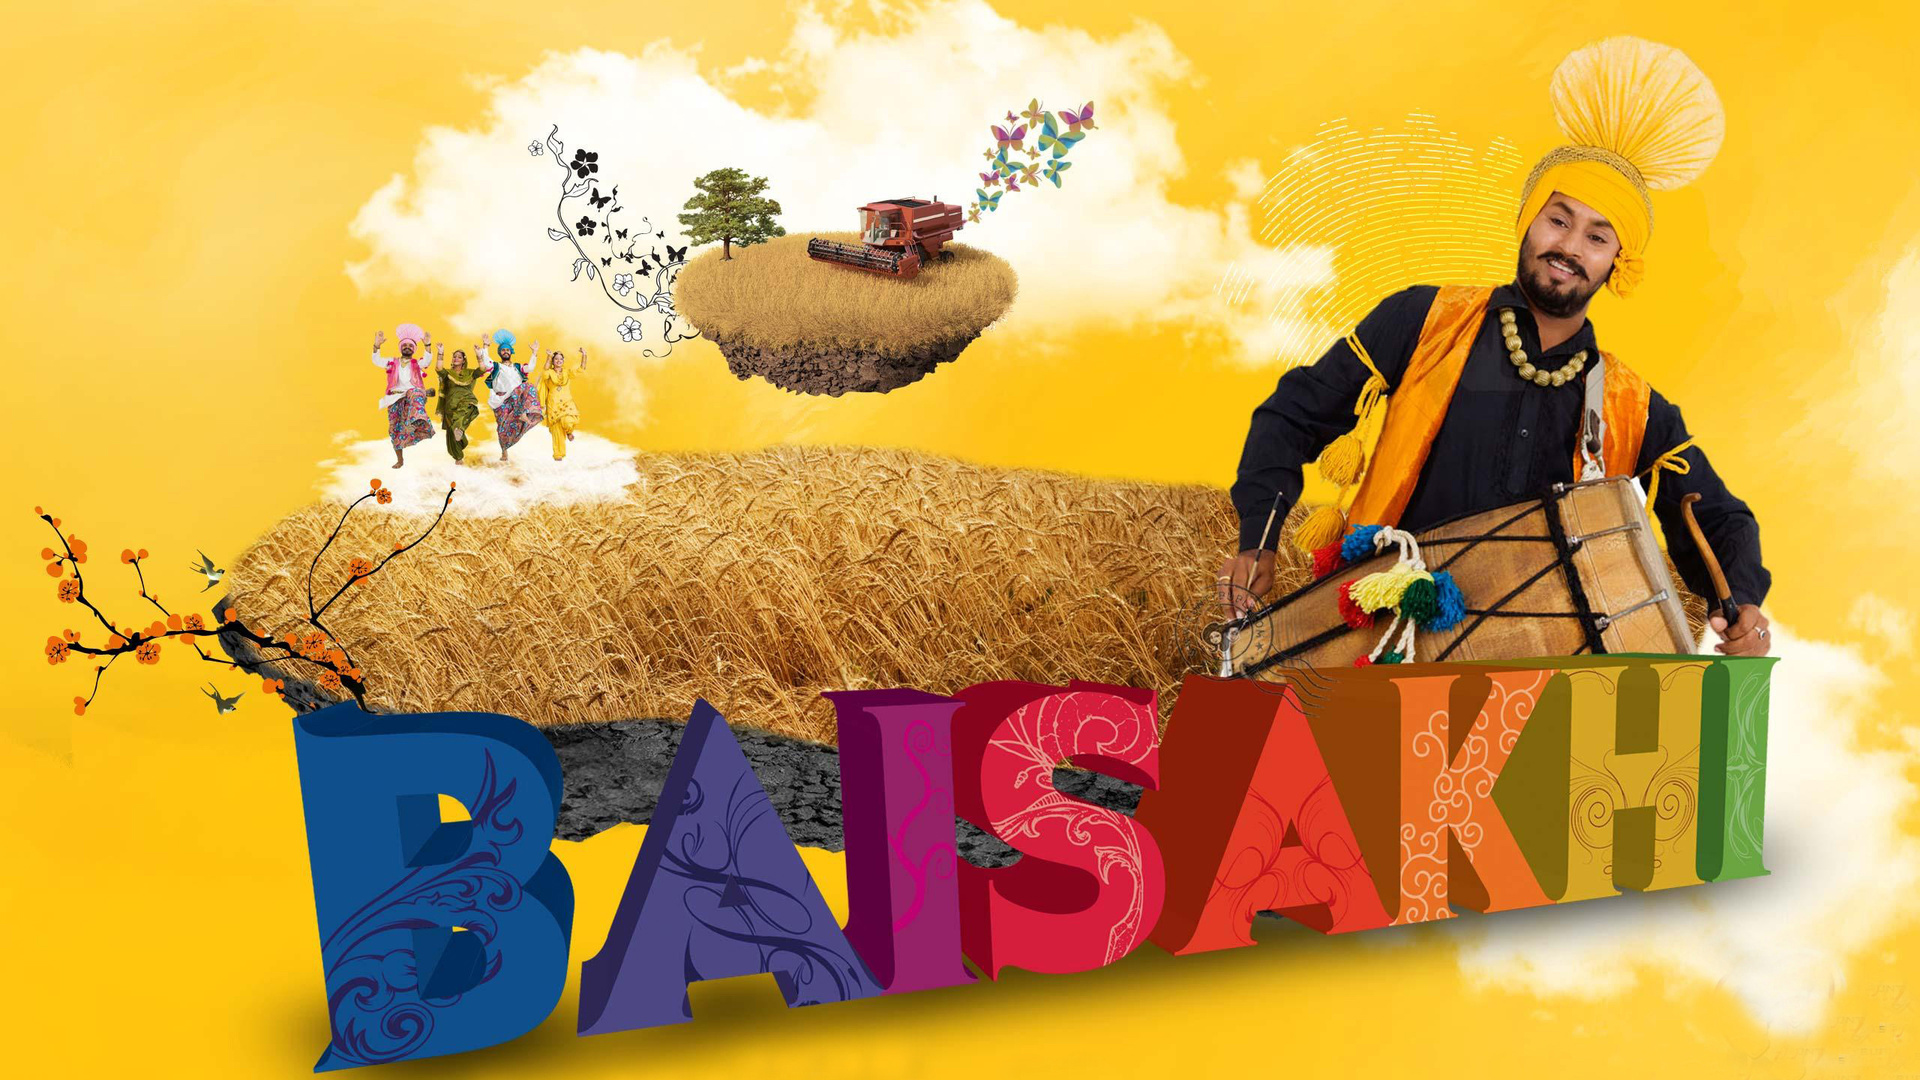 Happy Baisakhi Wallpapers Free Download - All Indian Festivals , HD Wallpaper & Backgrounds